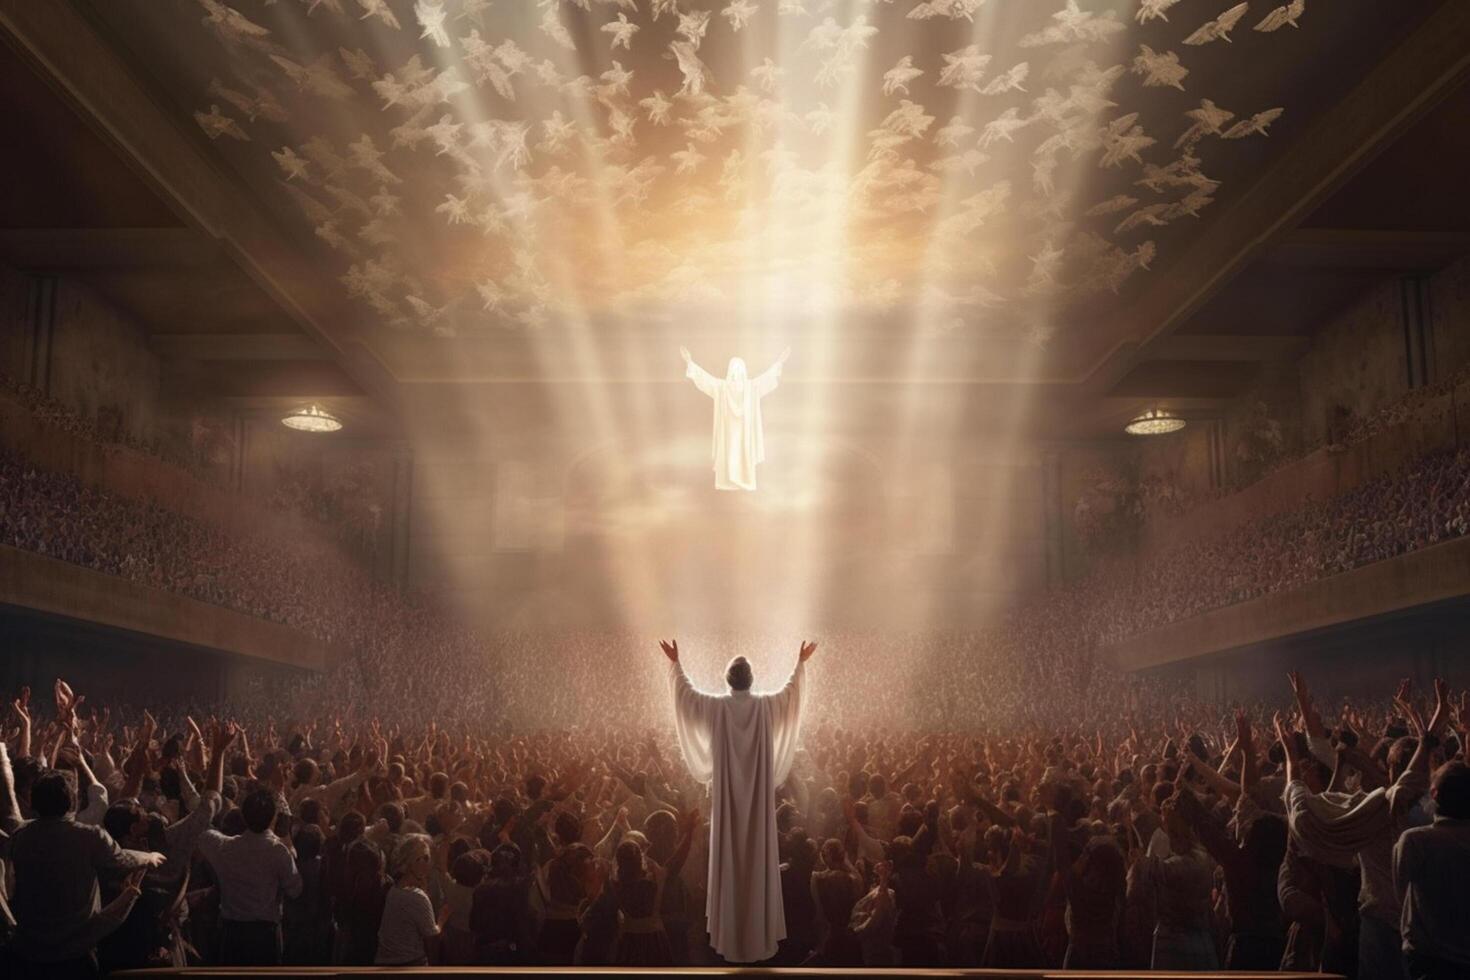 Ascension day of jesus christ or resurrection day of son of god. Good friday. Ascension day concept in church by photo